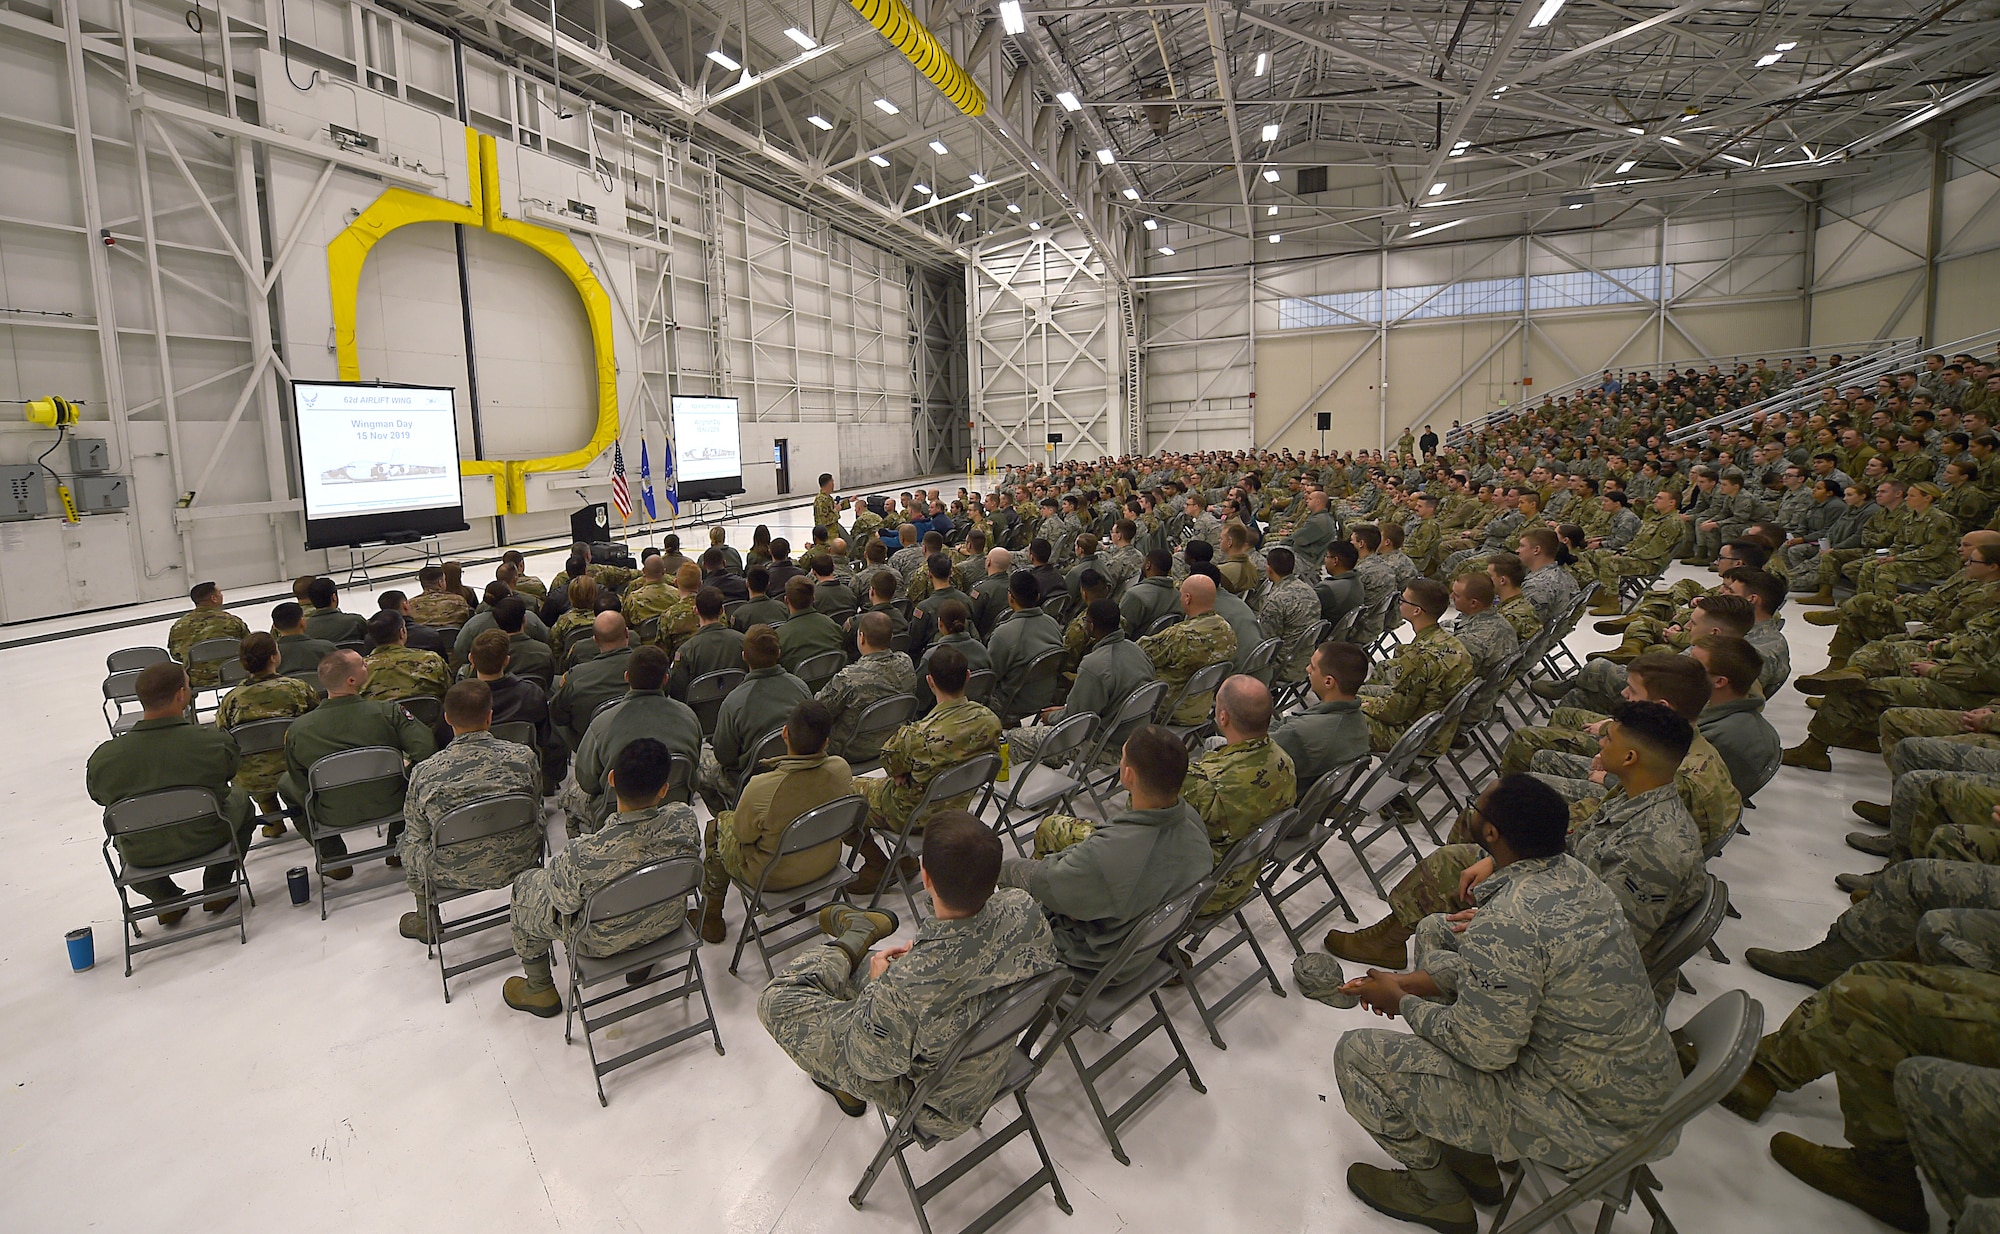 Members of the 62nd Airlift Wing gather in a hanger for a commander’s all-call on Joint Base Lewis-McChord, Wash., Nov. 15, 2019. The all-call was an opportunity for Col. Scovill Currin, 62nd Airlift Wing commander, and Chief Master Sgt. Rob Schultz, 62nd Airlift Wing command chief, to address the wing en masse.